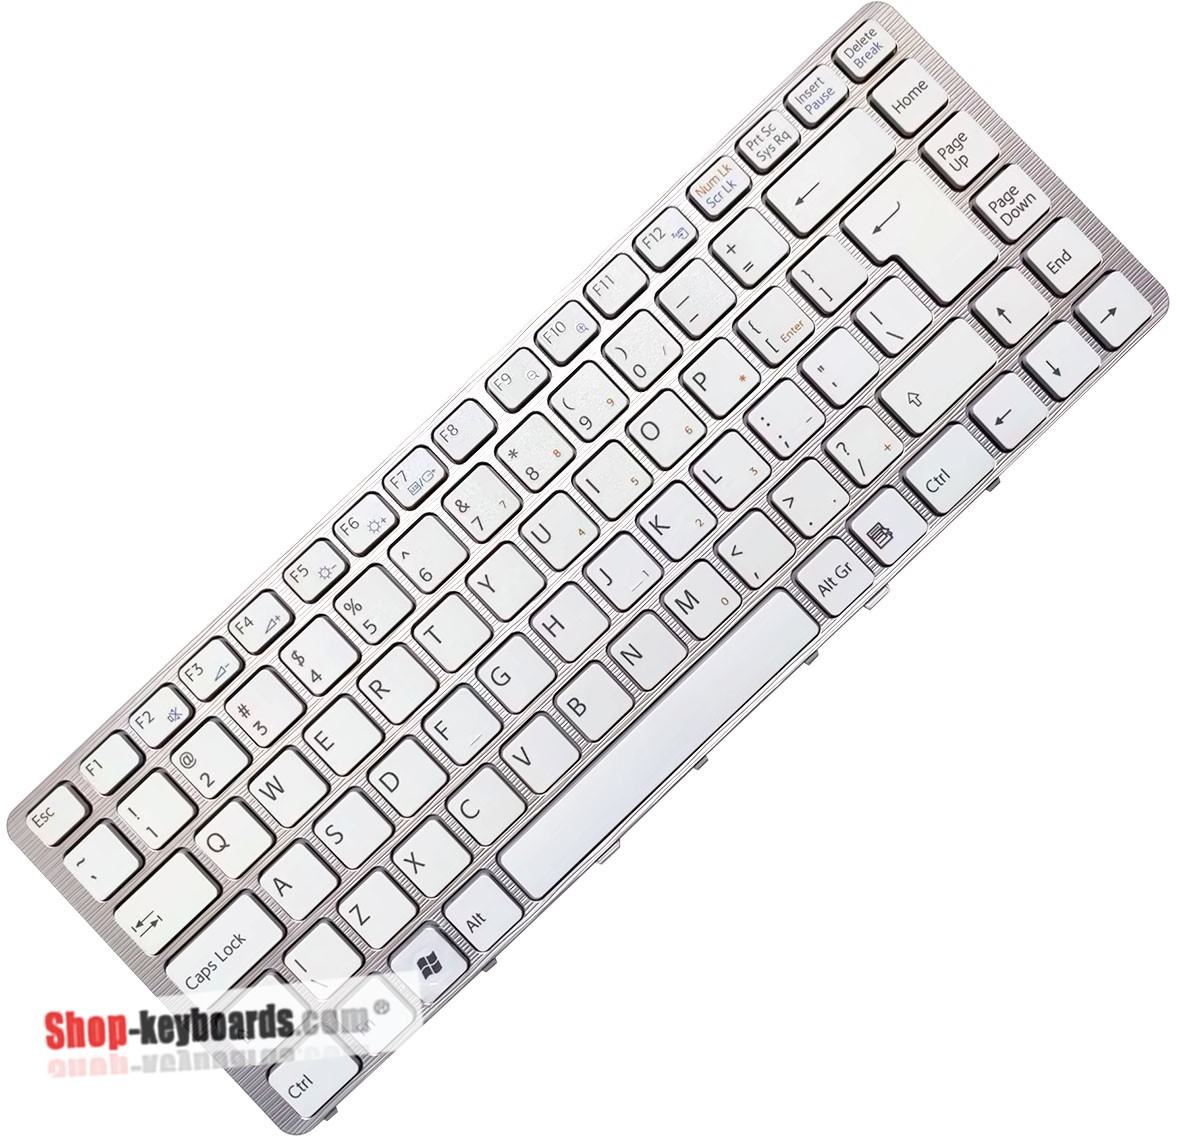 Sony Vaio VGN-NW220F/W Keyboard replacement